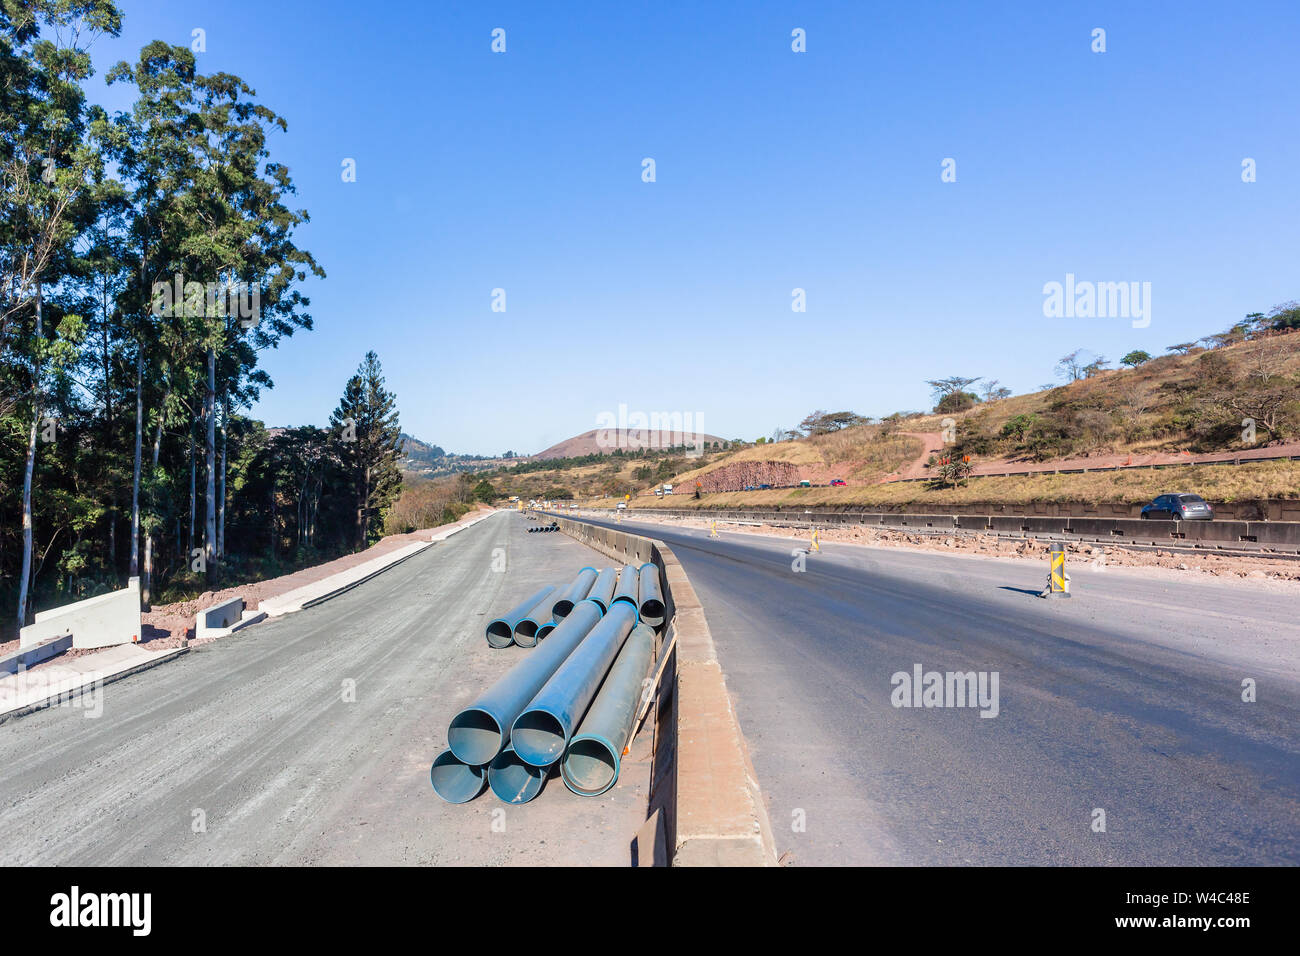 Road Highway industrial construction expansion of new traffic routes lanes entry exit ramps to existing network. Stock Photo